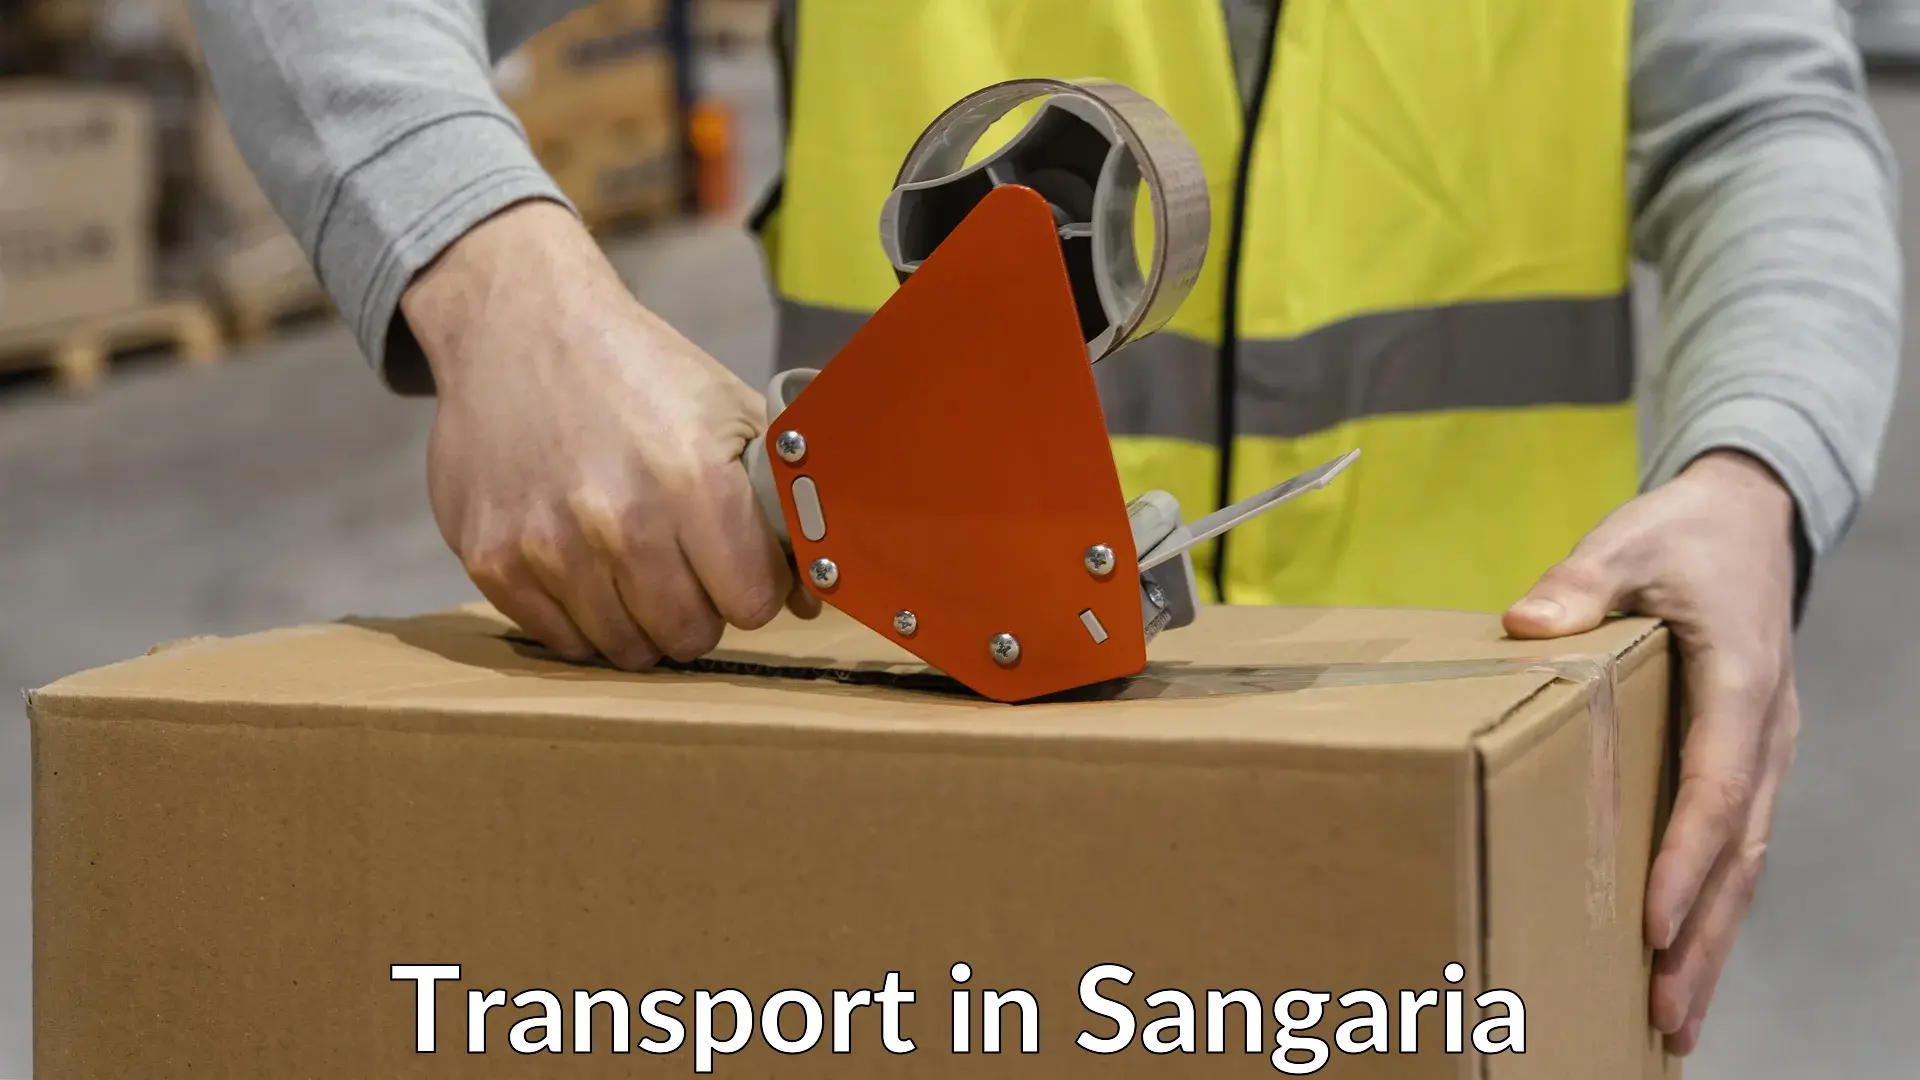 Air cargo transport services in Sangaria